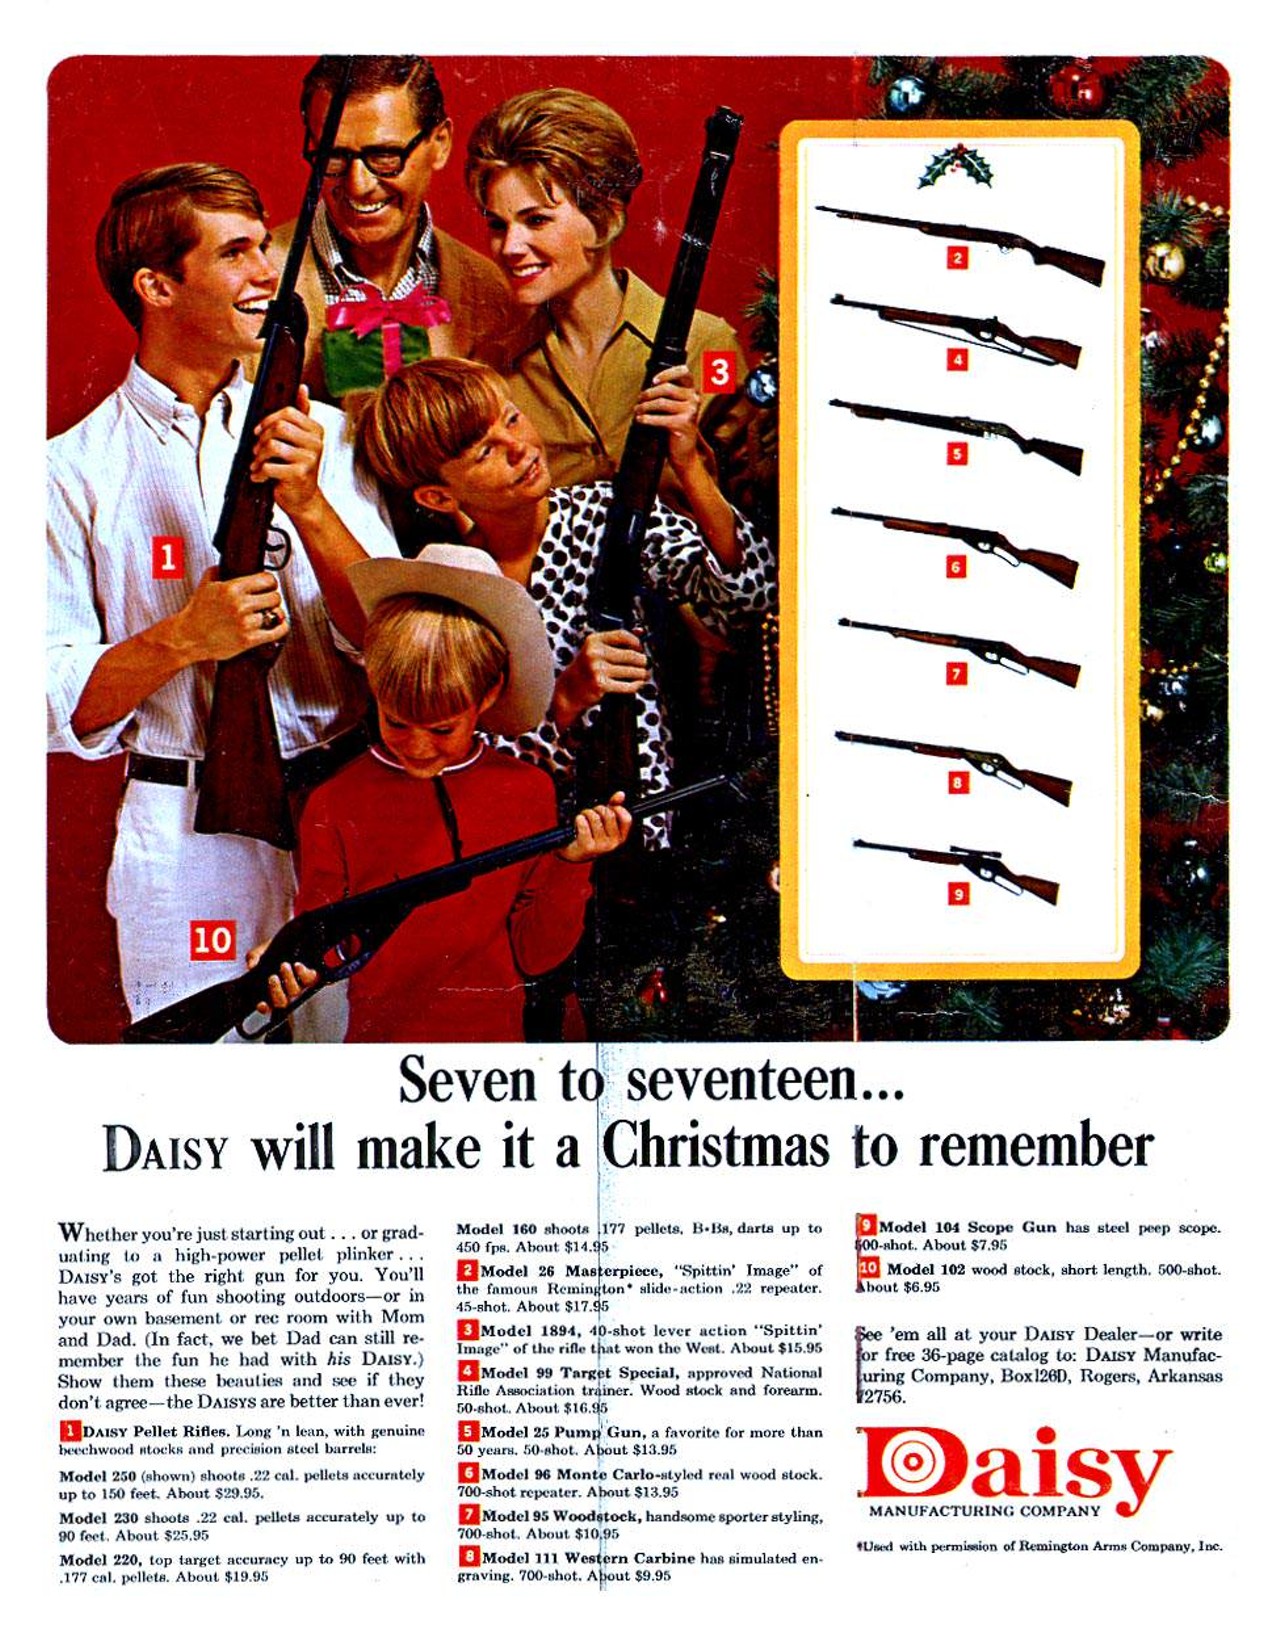 Daisy gun holiday ad, date not listed